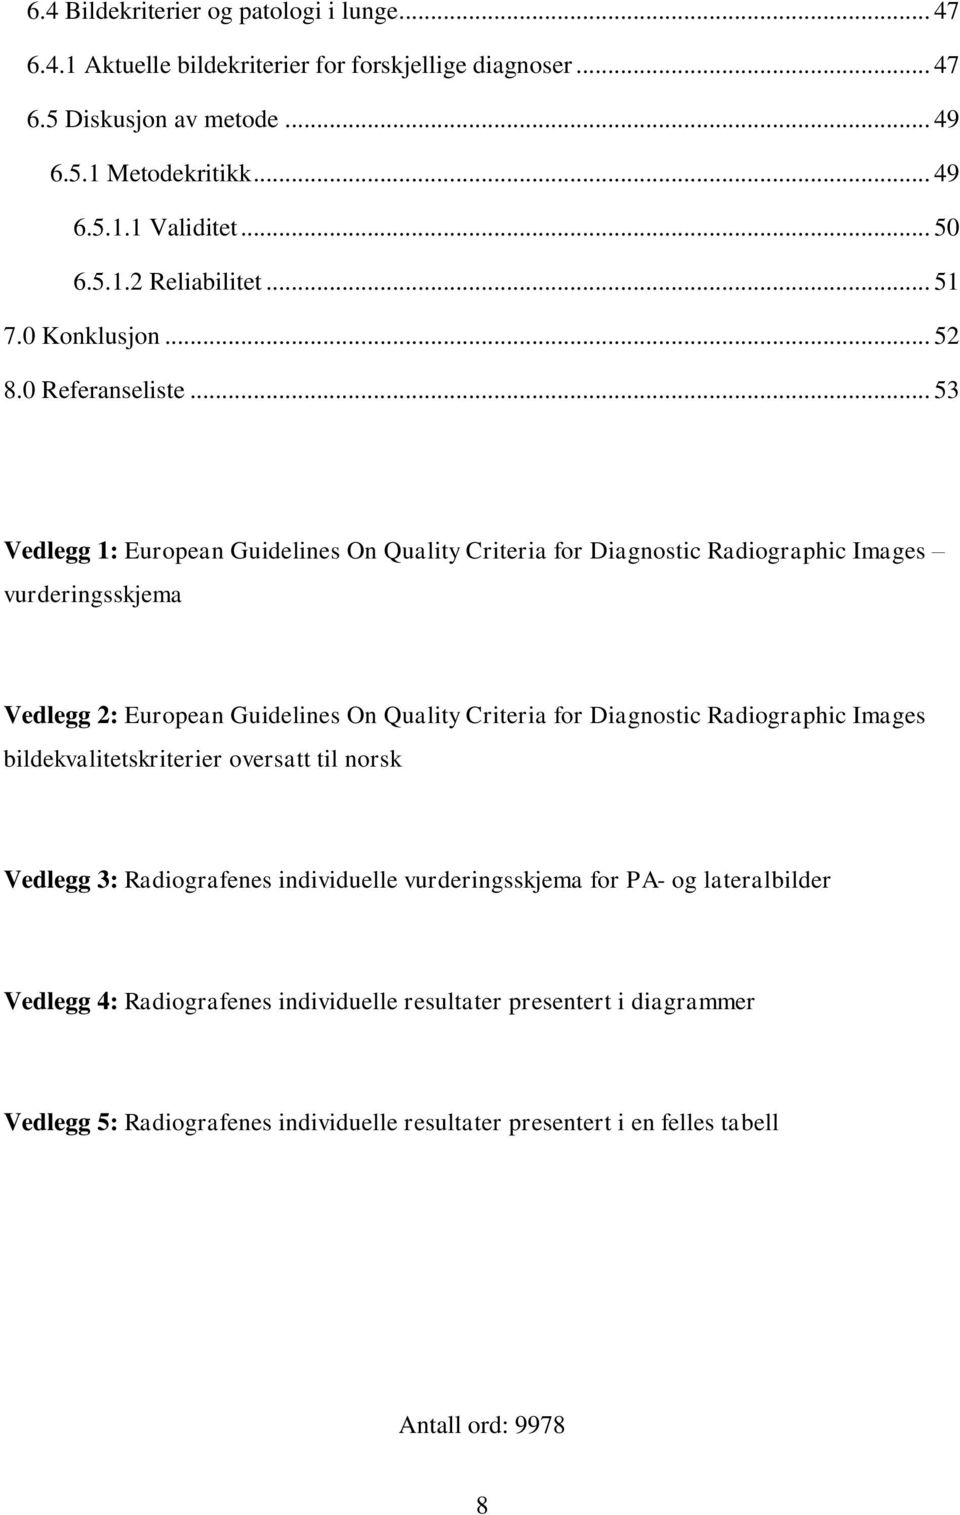 .. 53 Vedlegg 1: European Guidelines On Quality Criteria for Diagnostic Radiographic Images vurderingsskjema Vedlegg 2: European Guidelines On Quality Criteria for Diagnostic